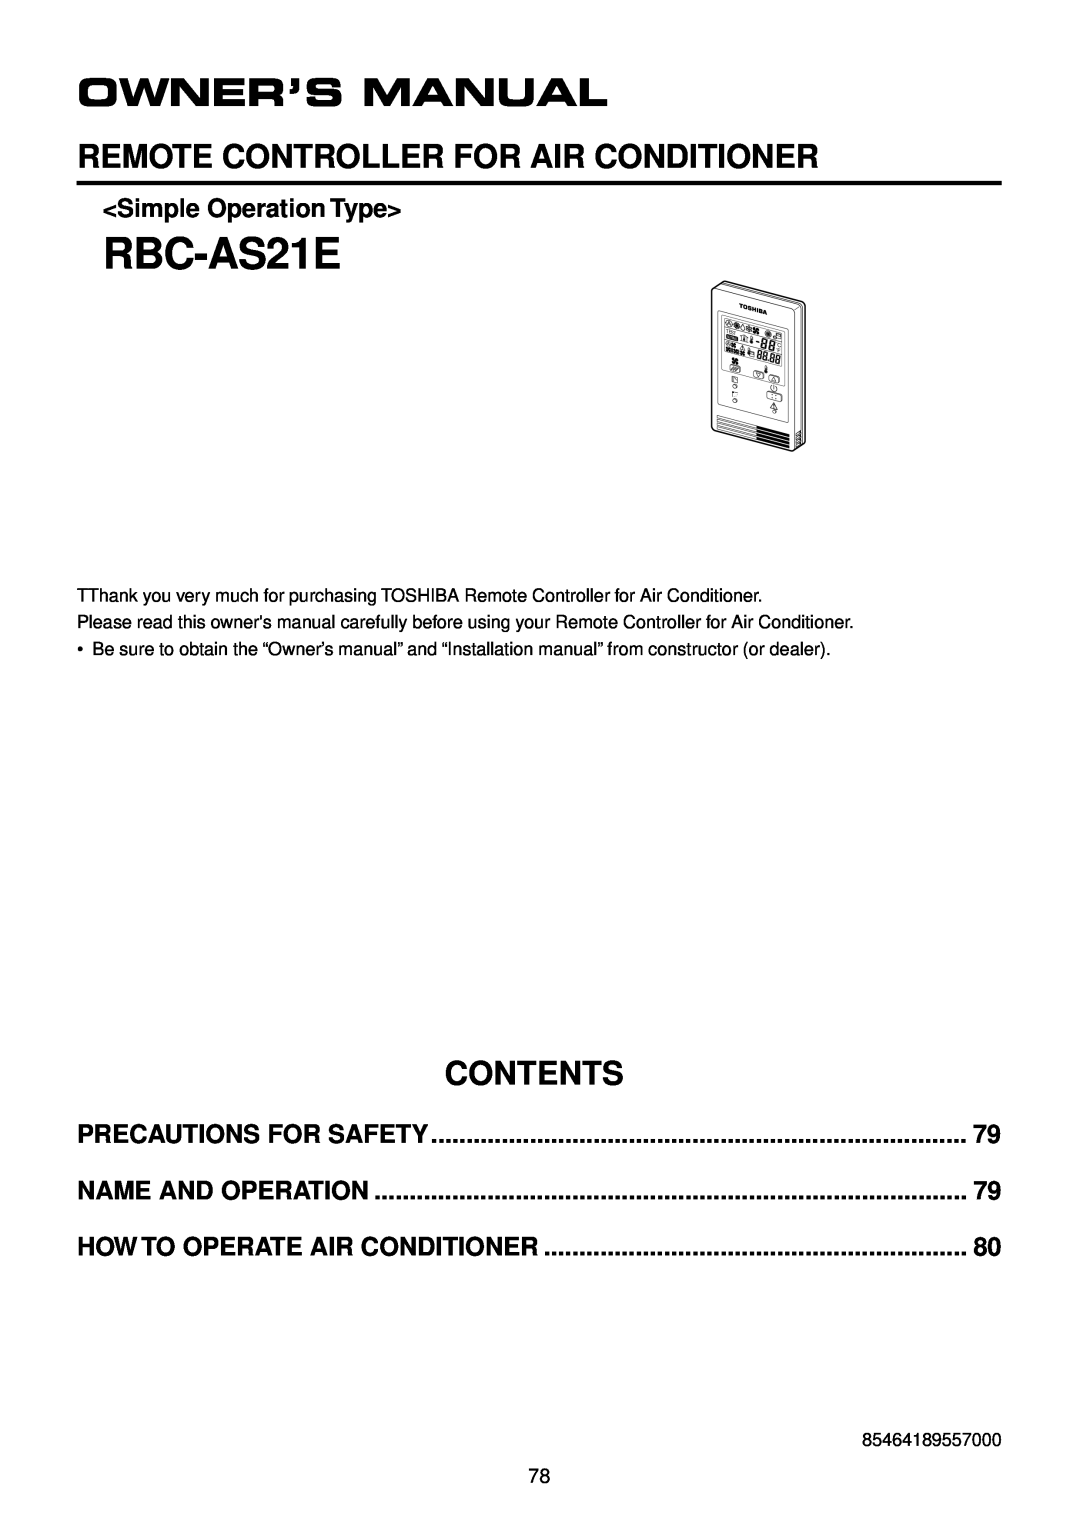 Toshiba R410A service manual RBC-AS21E, Remote Controller For Air Conditioner, Owner’S Manual, Contents 